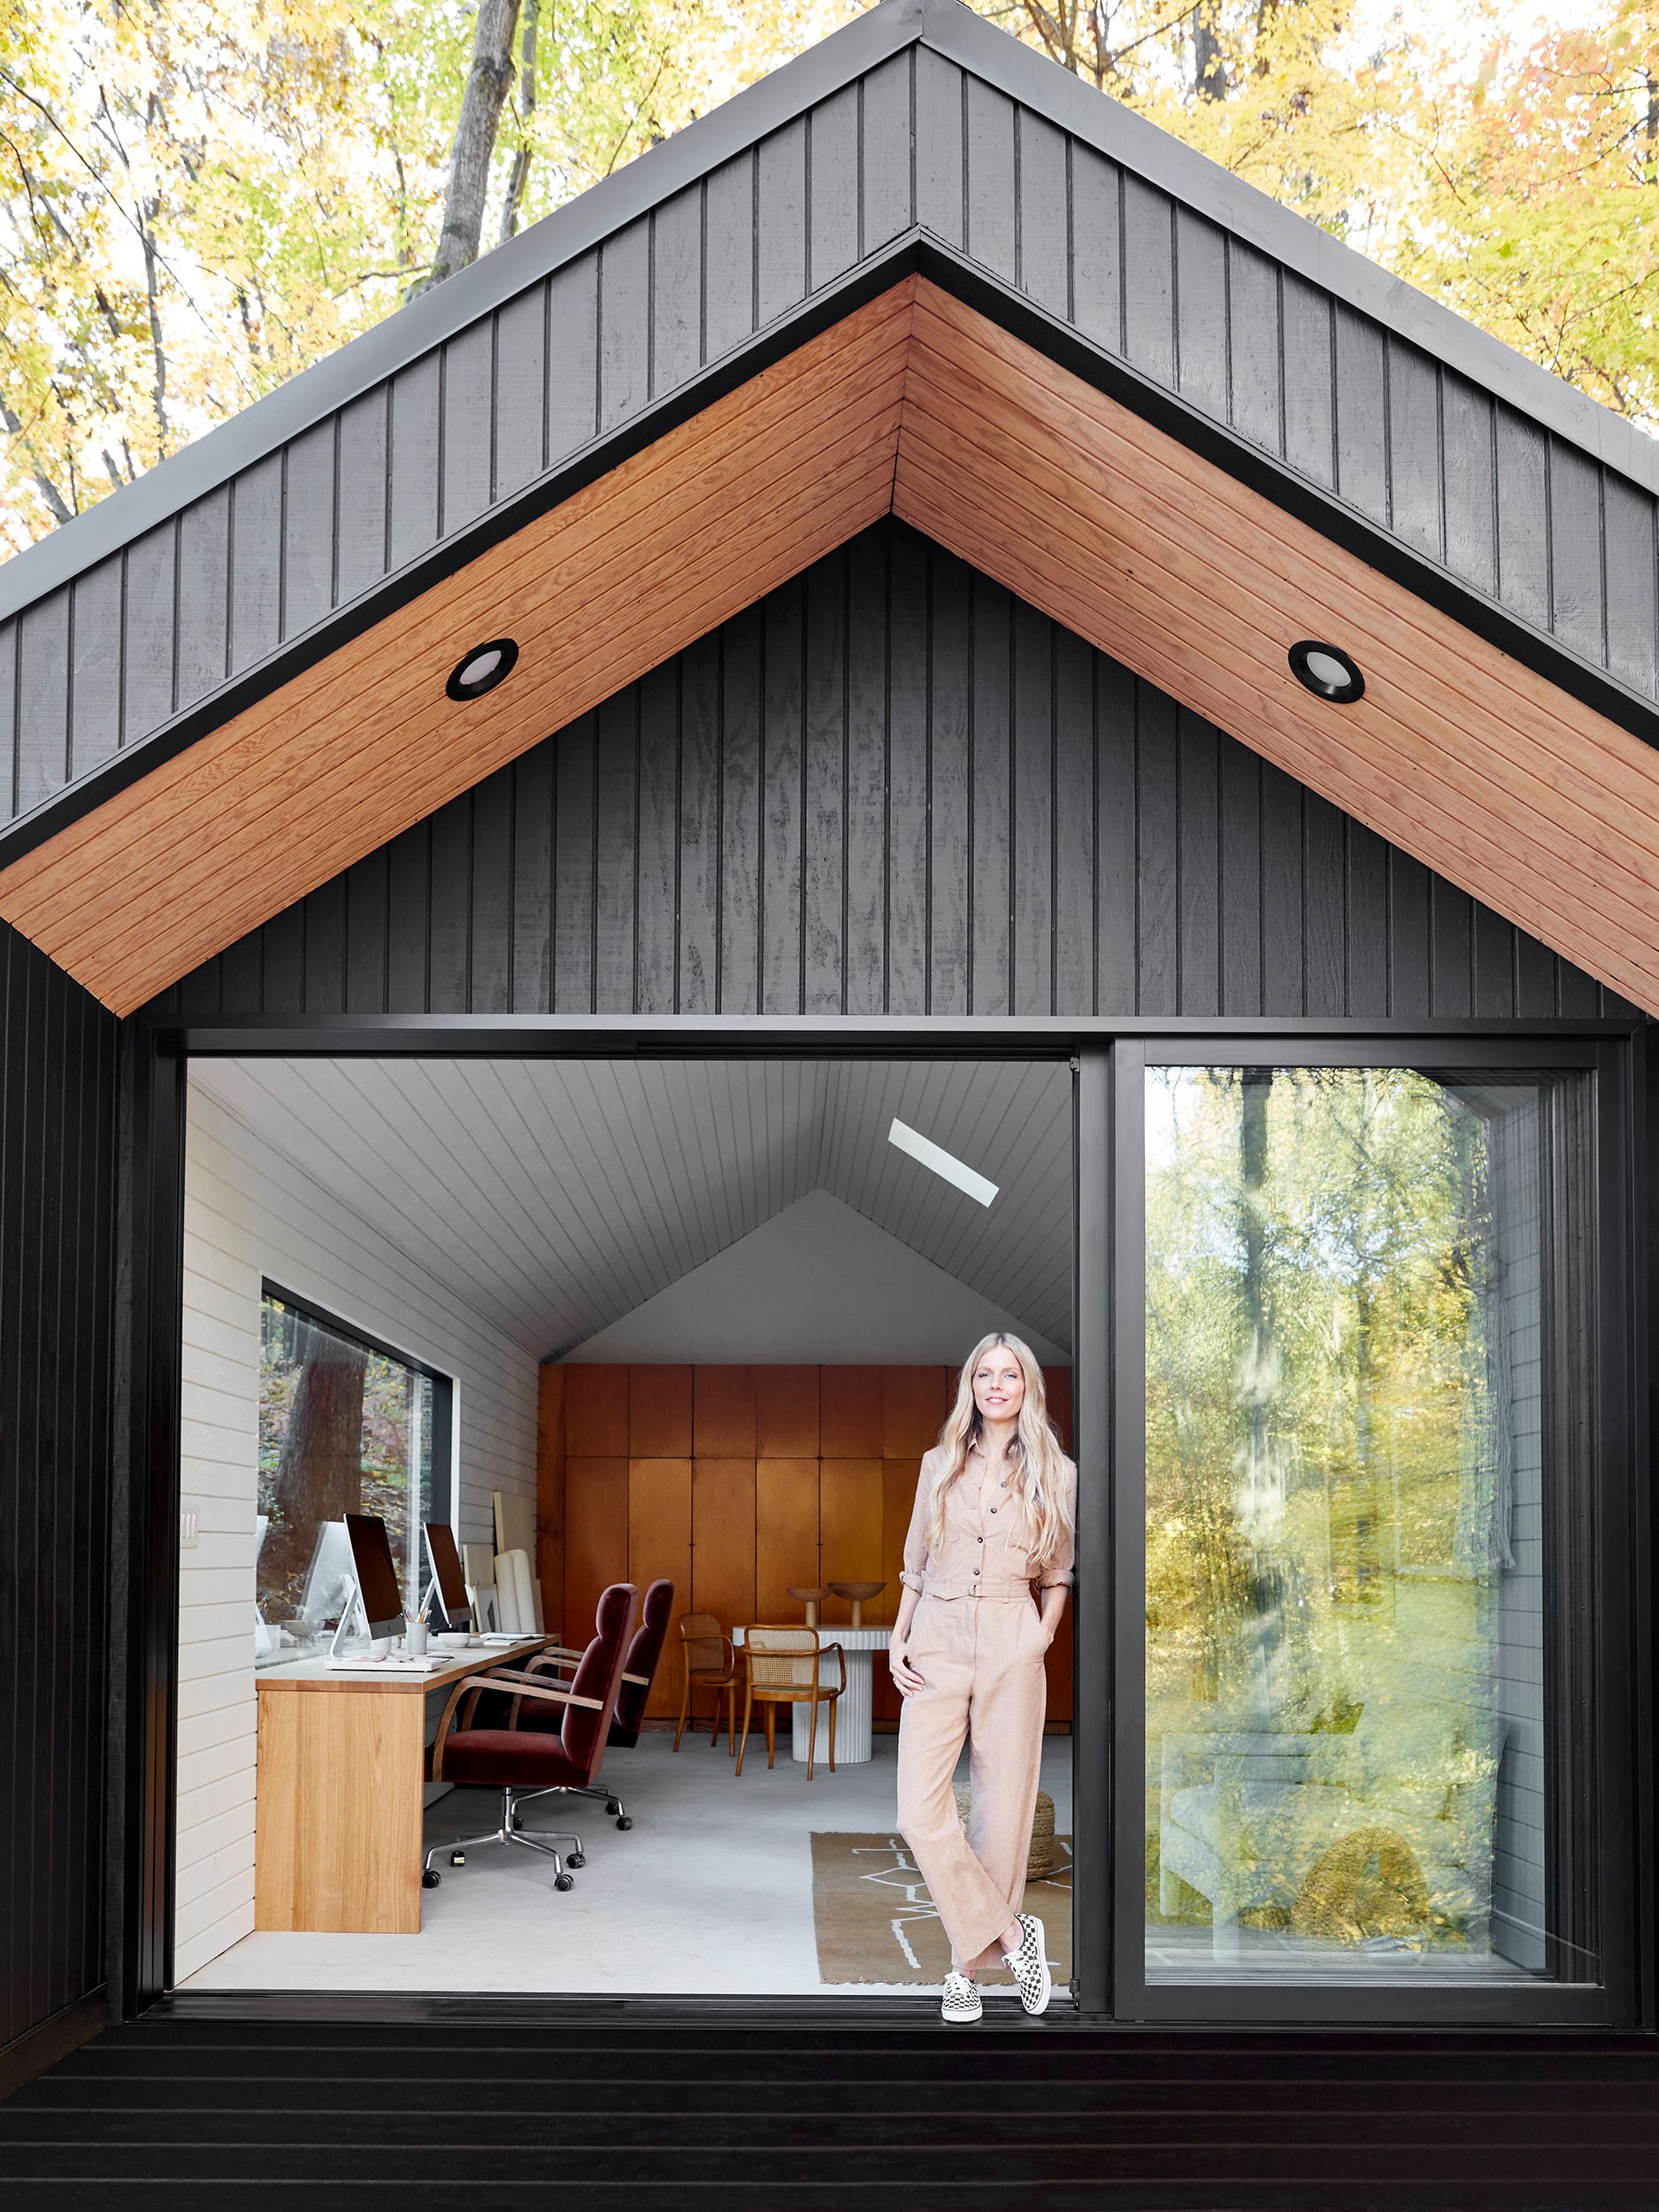 Why Sarah Sherman Samuel Built Her Office in the Middle of a Forest